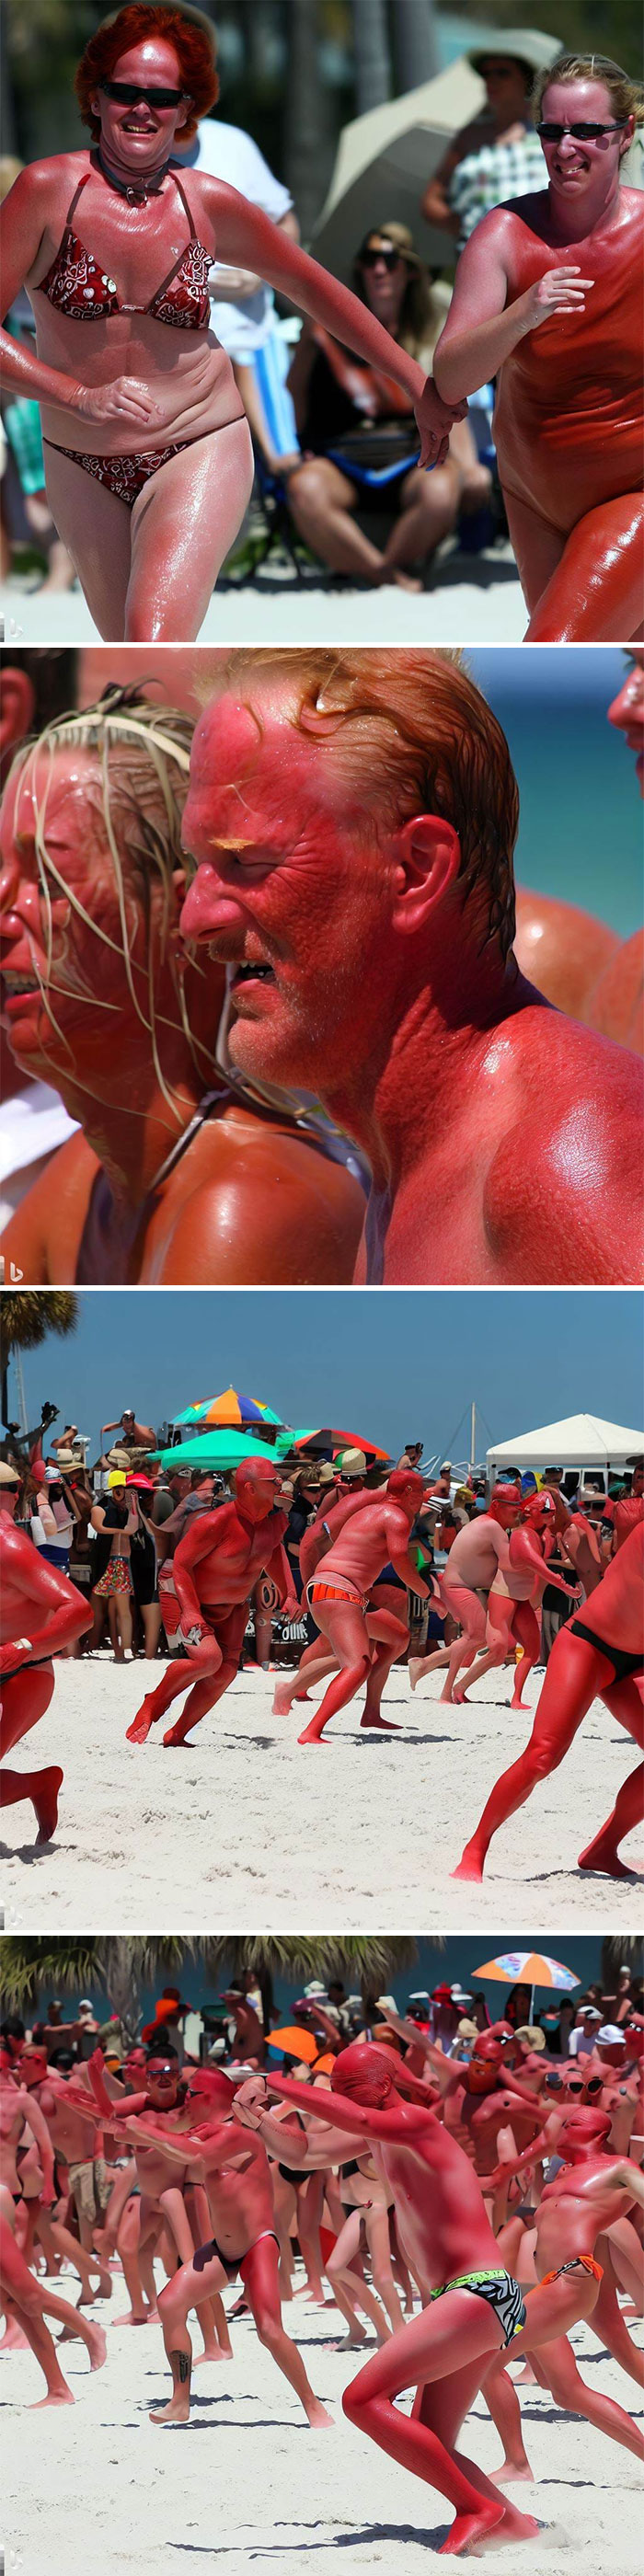 Extreme Sunburn Competition In Florida. As A Redhead, This One Hurts. 😄